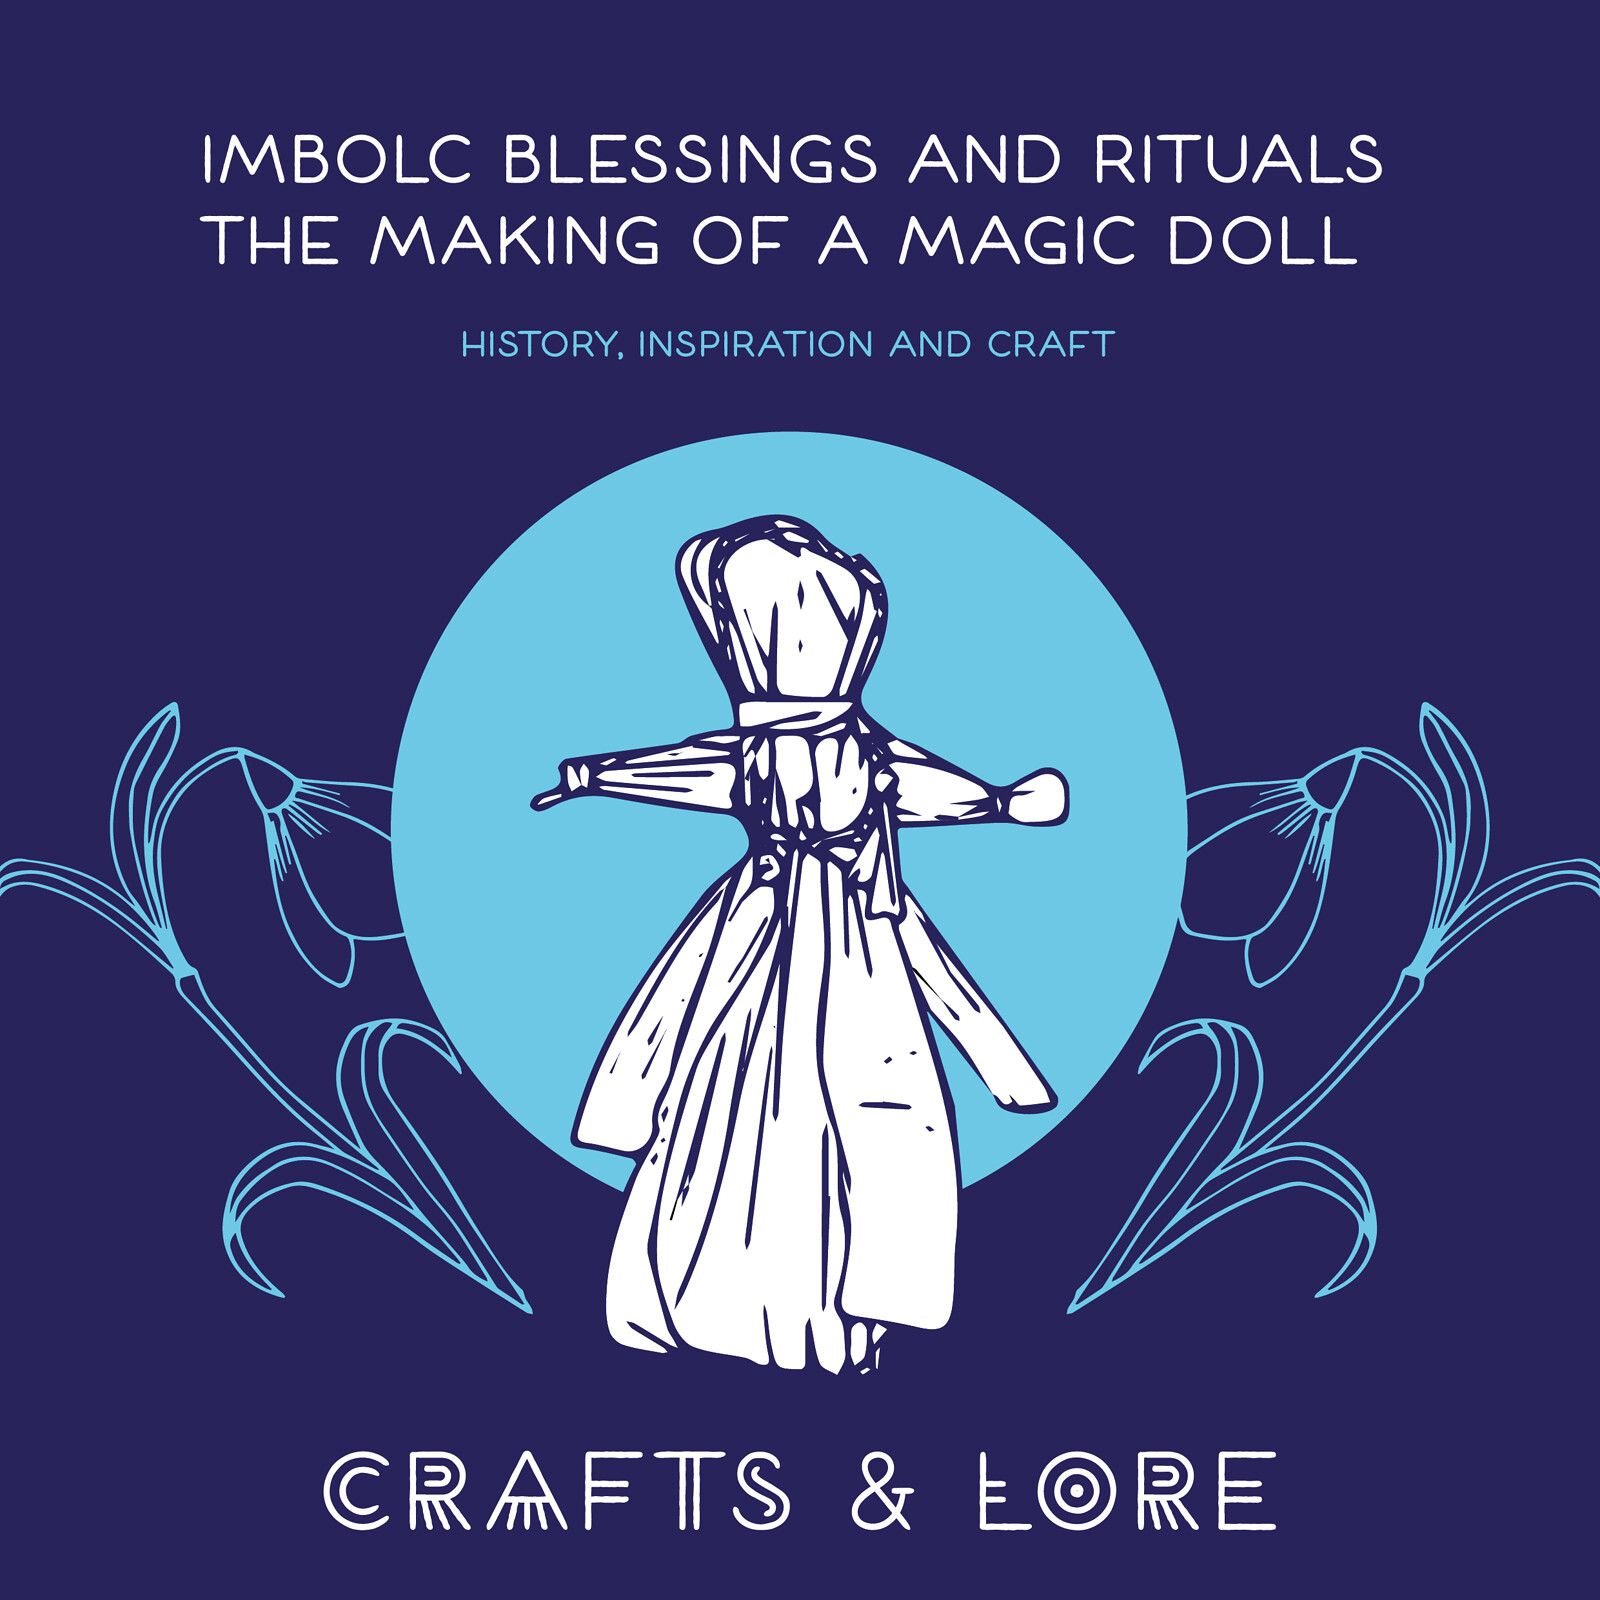 9+ Crafts For Imbolc